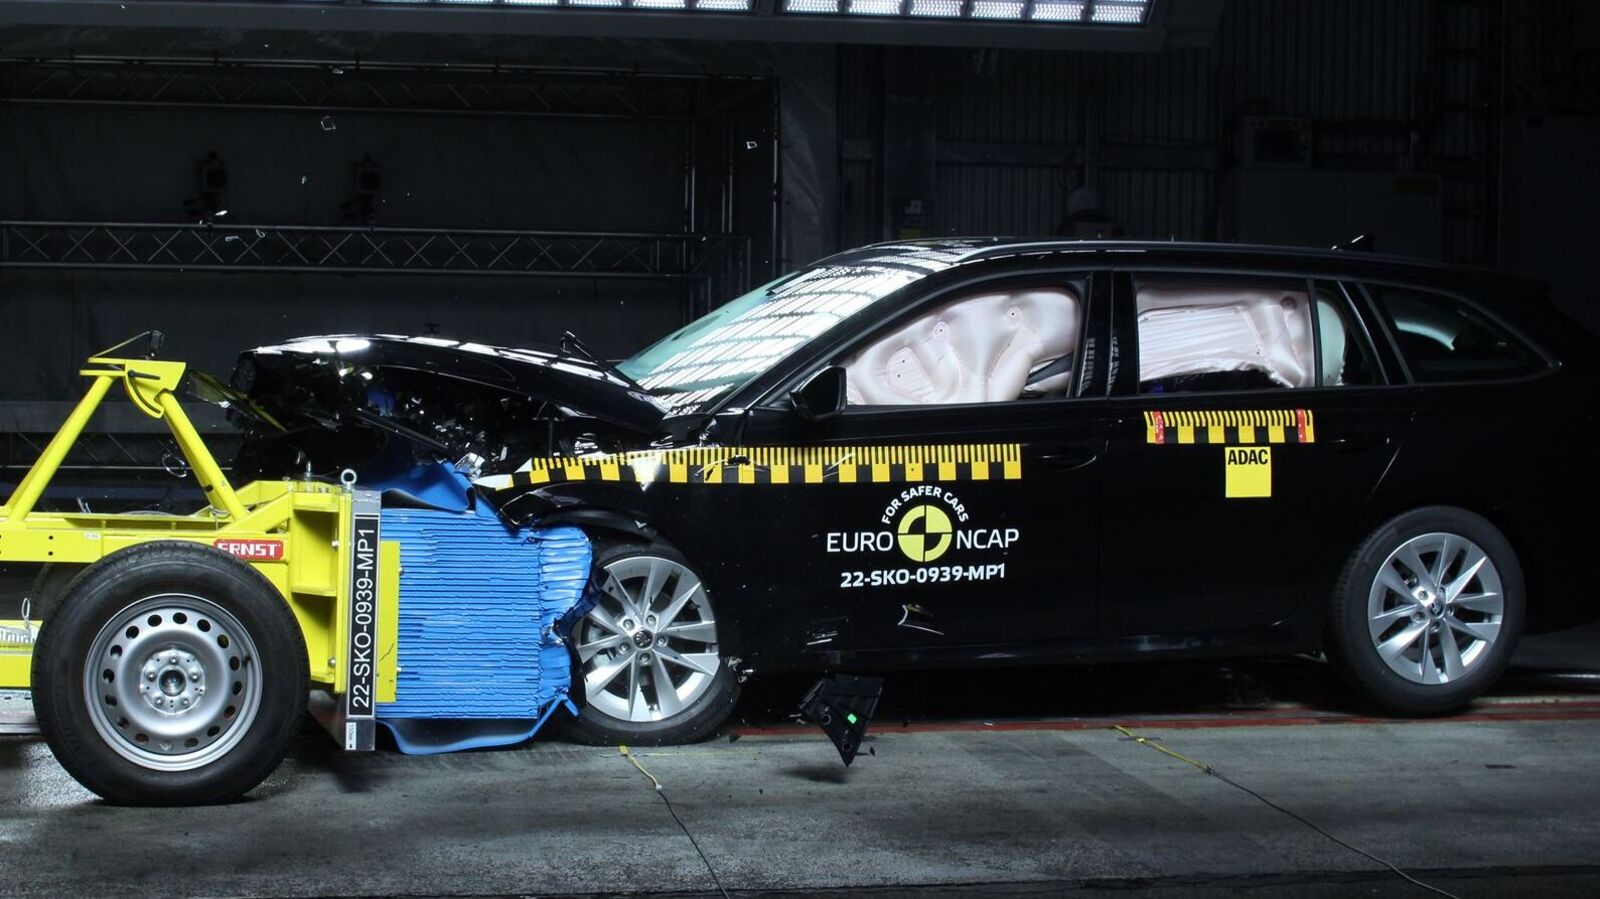 IIHS Adds New Frontal Crash Test Most Cars Expected to Perform Poorly